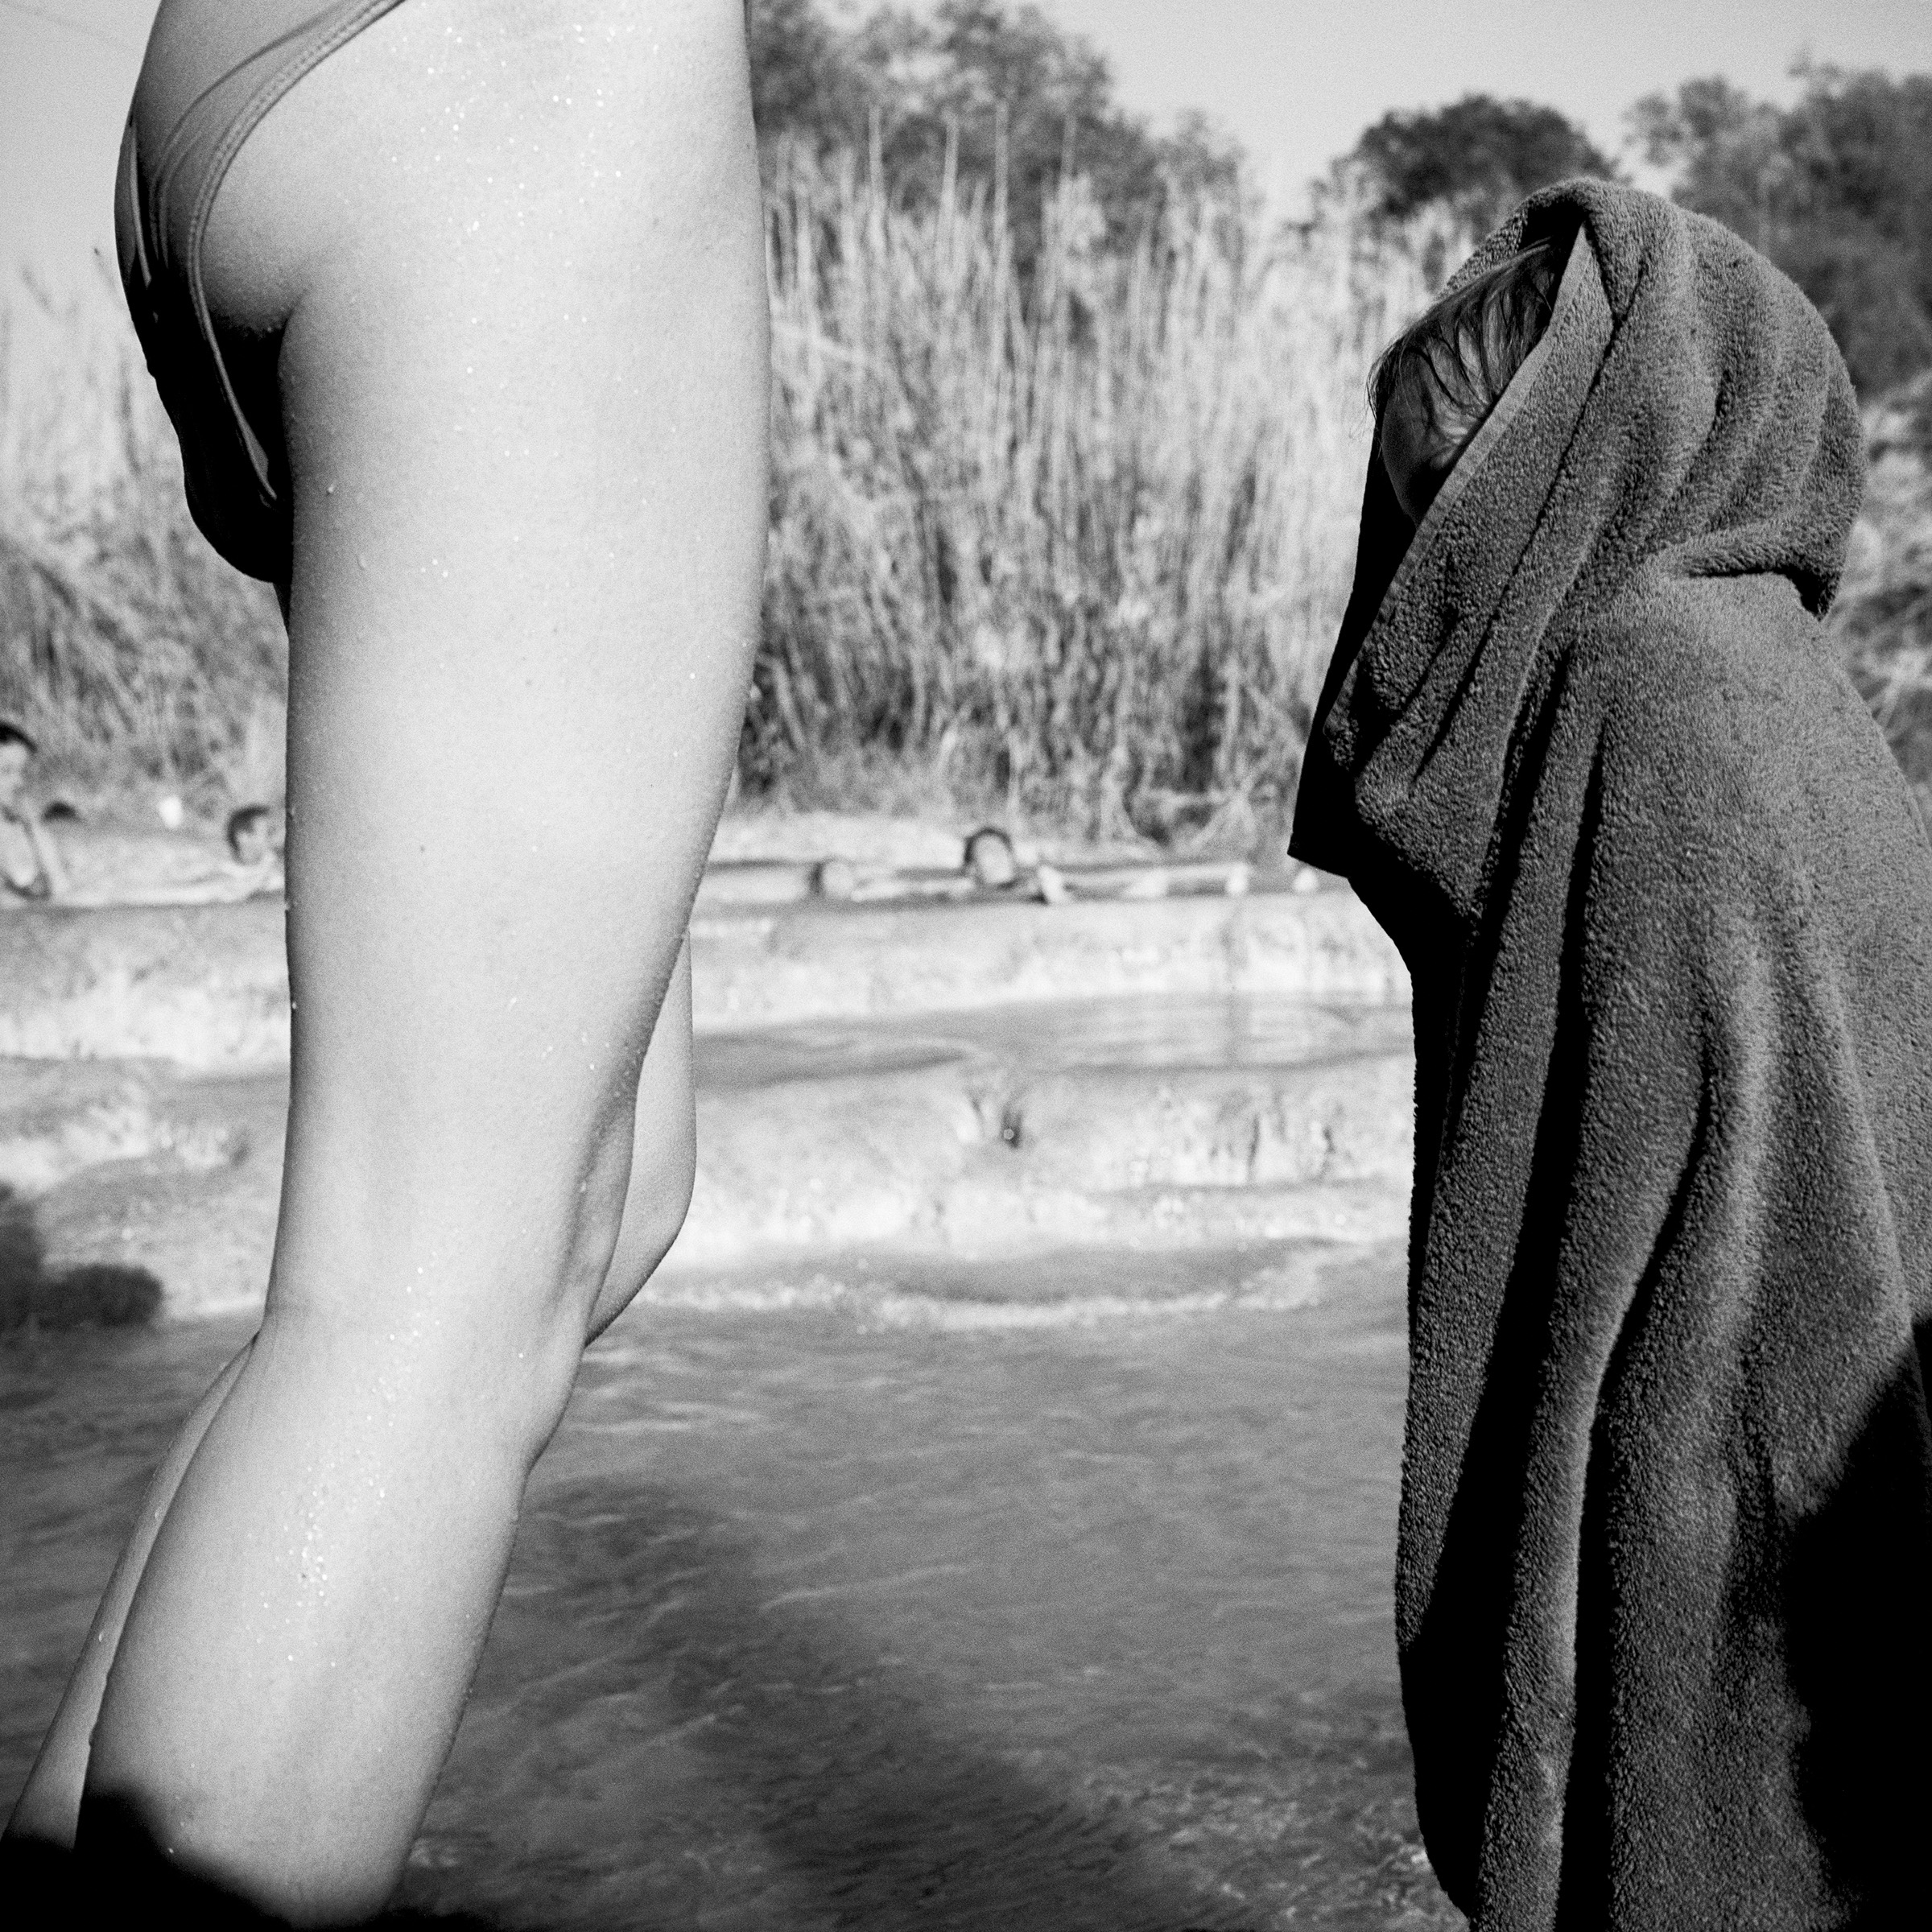     Ruth Kaplan, Hot Springs, Saturnia, Italy, 1997 (gelatin silver print; 14.25&#215;14.25in (image)), from the series Bathers. Courtesy of the artist and Stephen Bulger Gallery. © Ruth Kaplan

